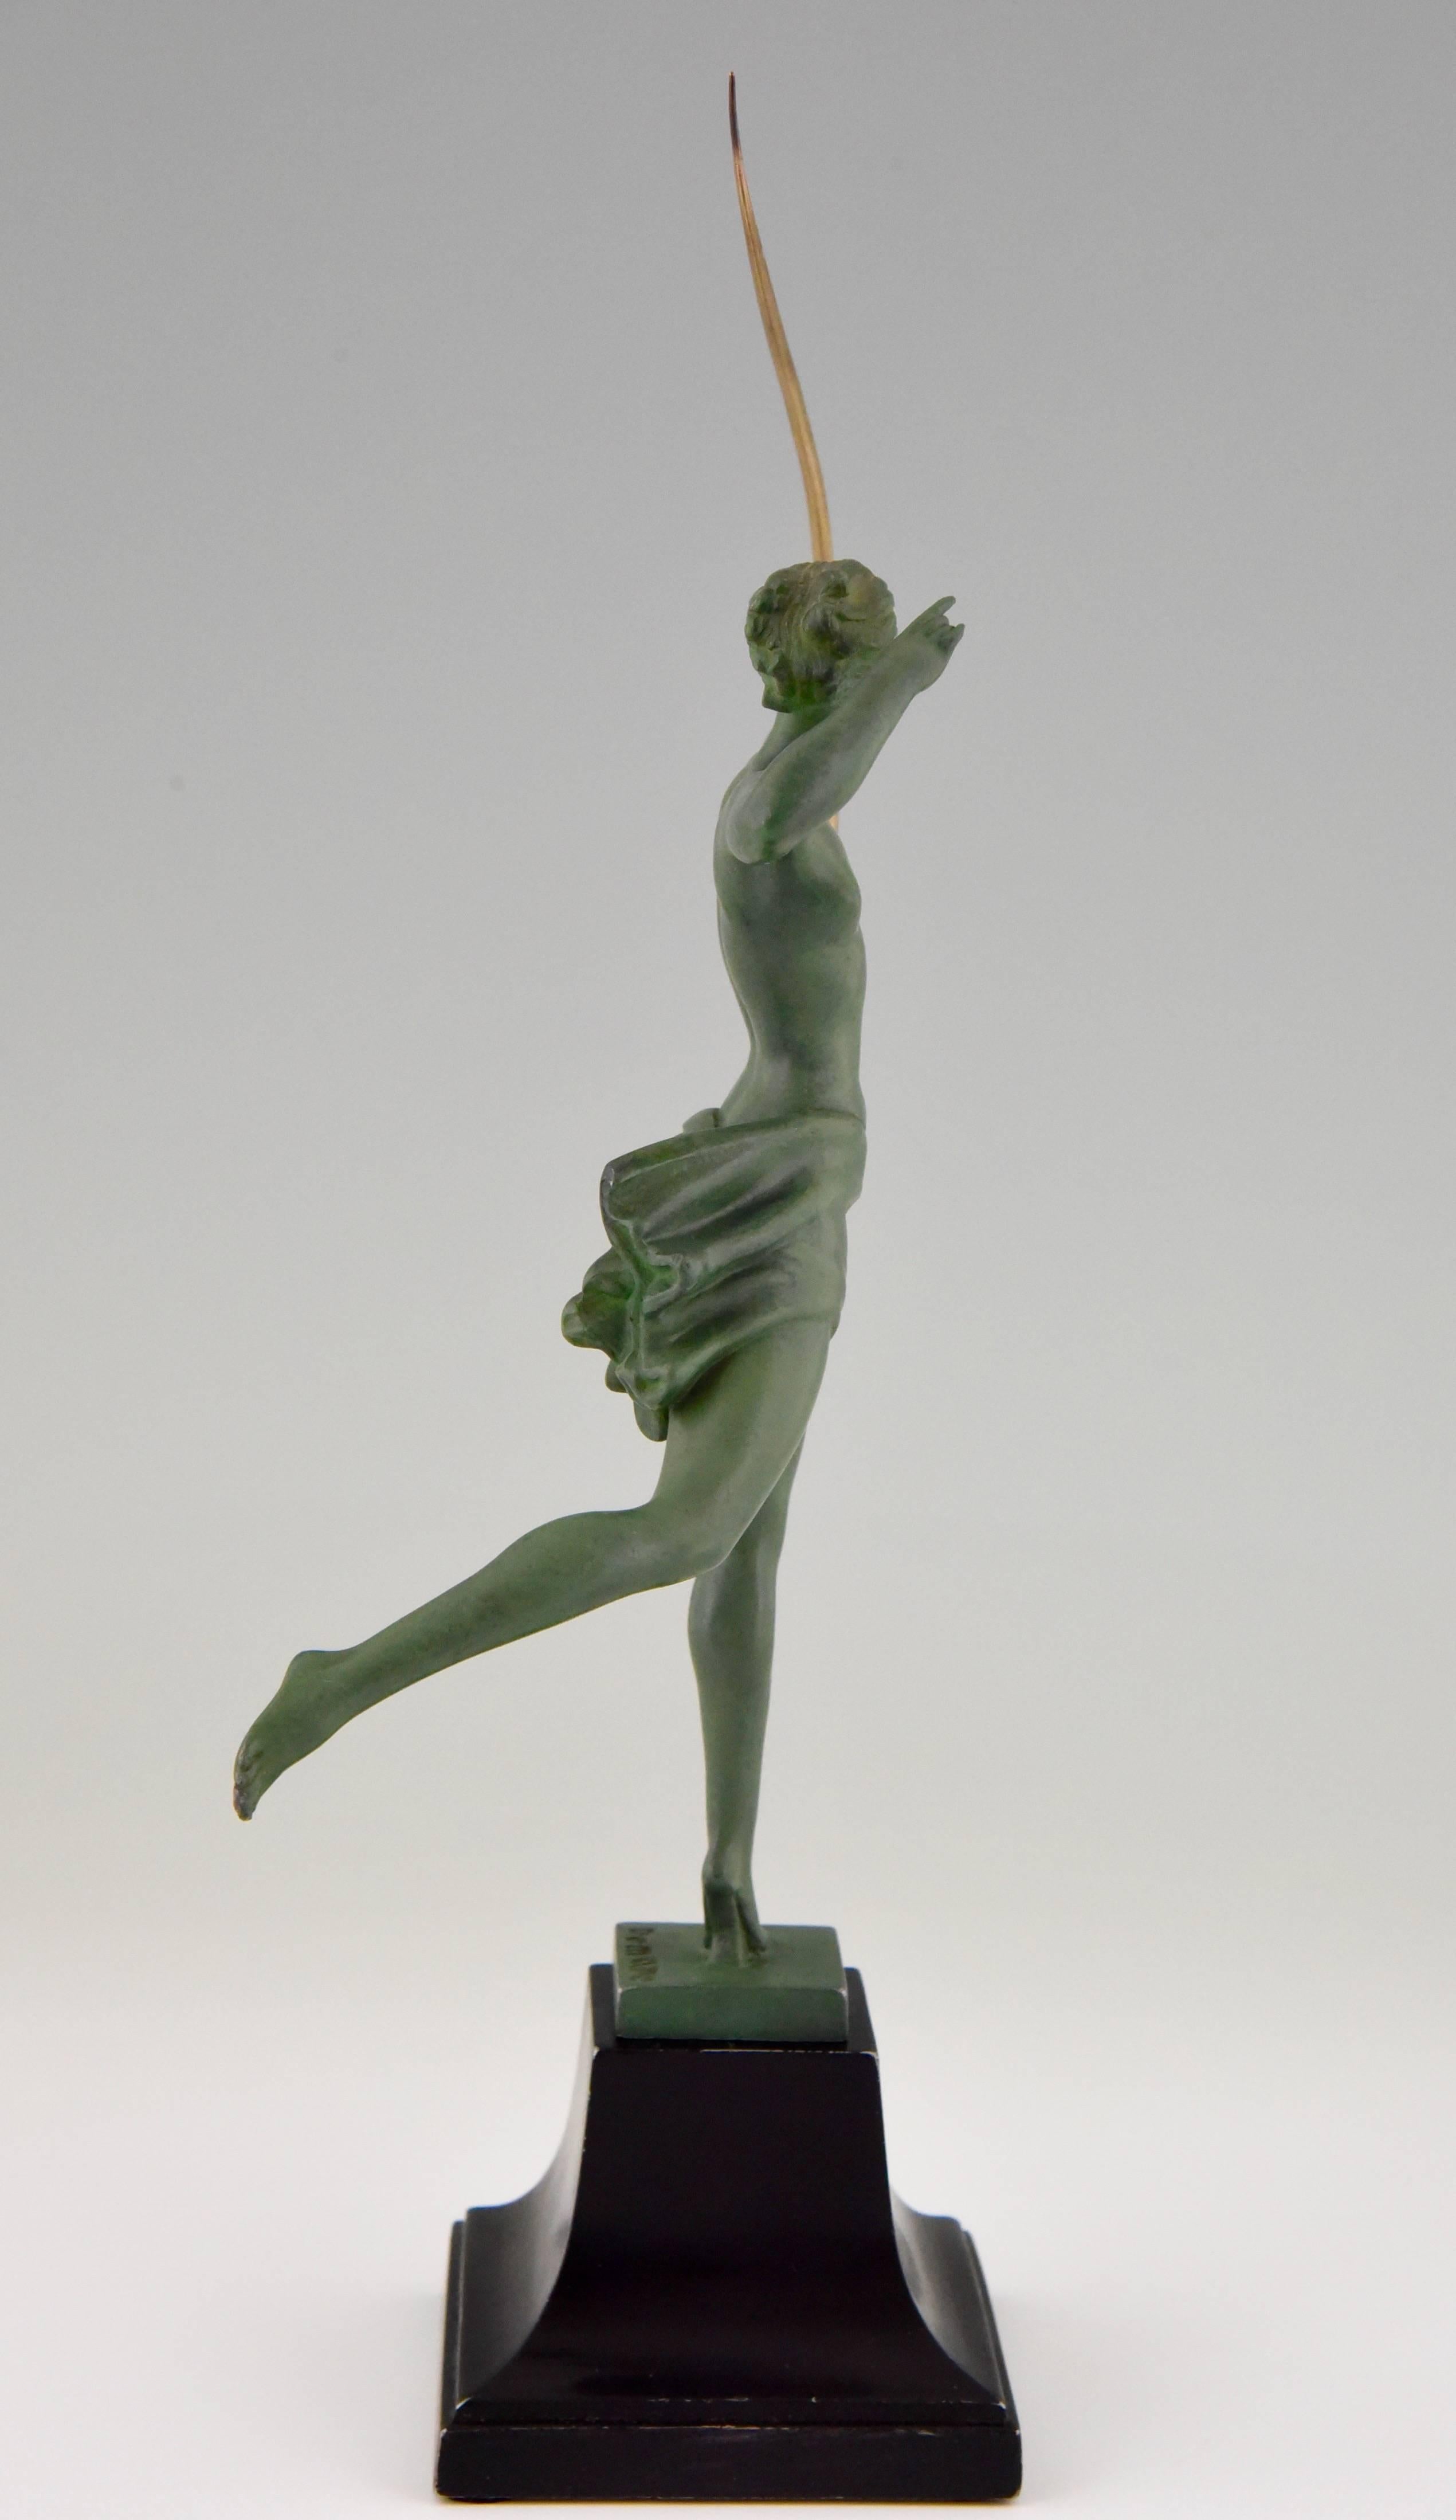 Metal French Art Deco Sculpture of Diana Nude with Bow by De Marco, 1930